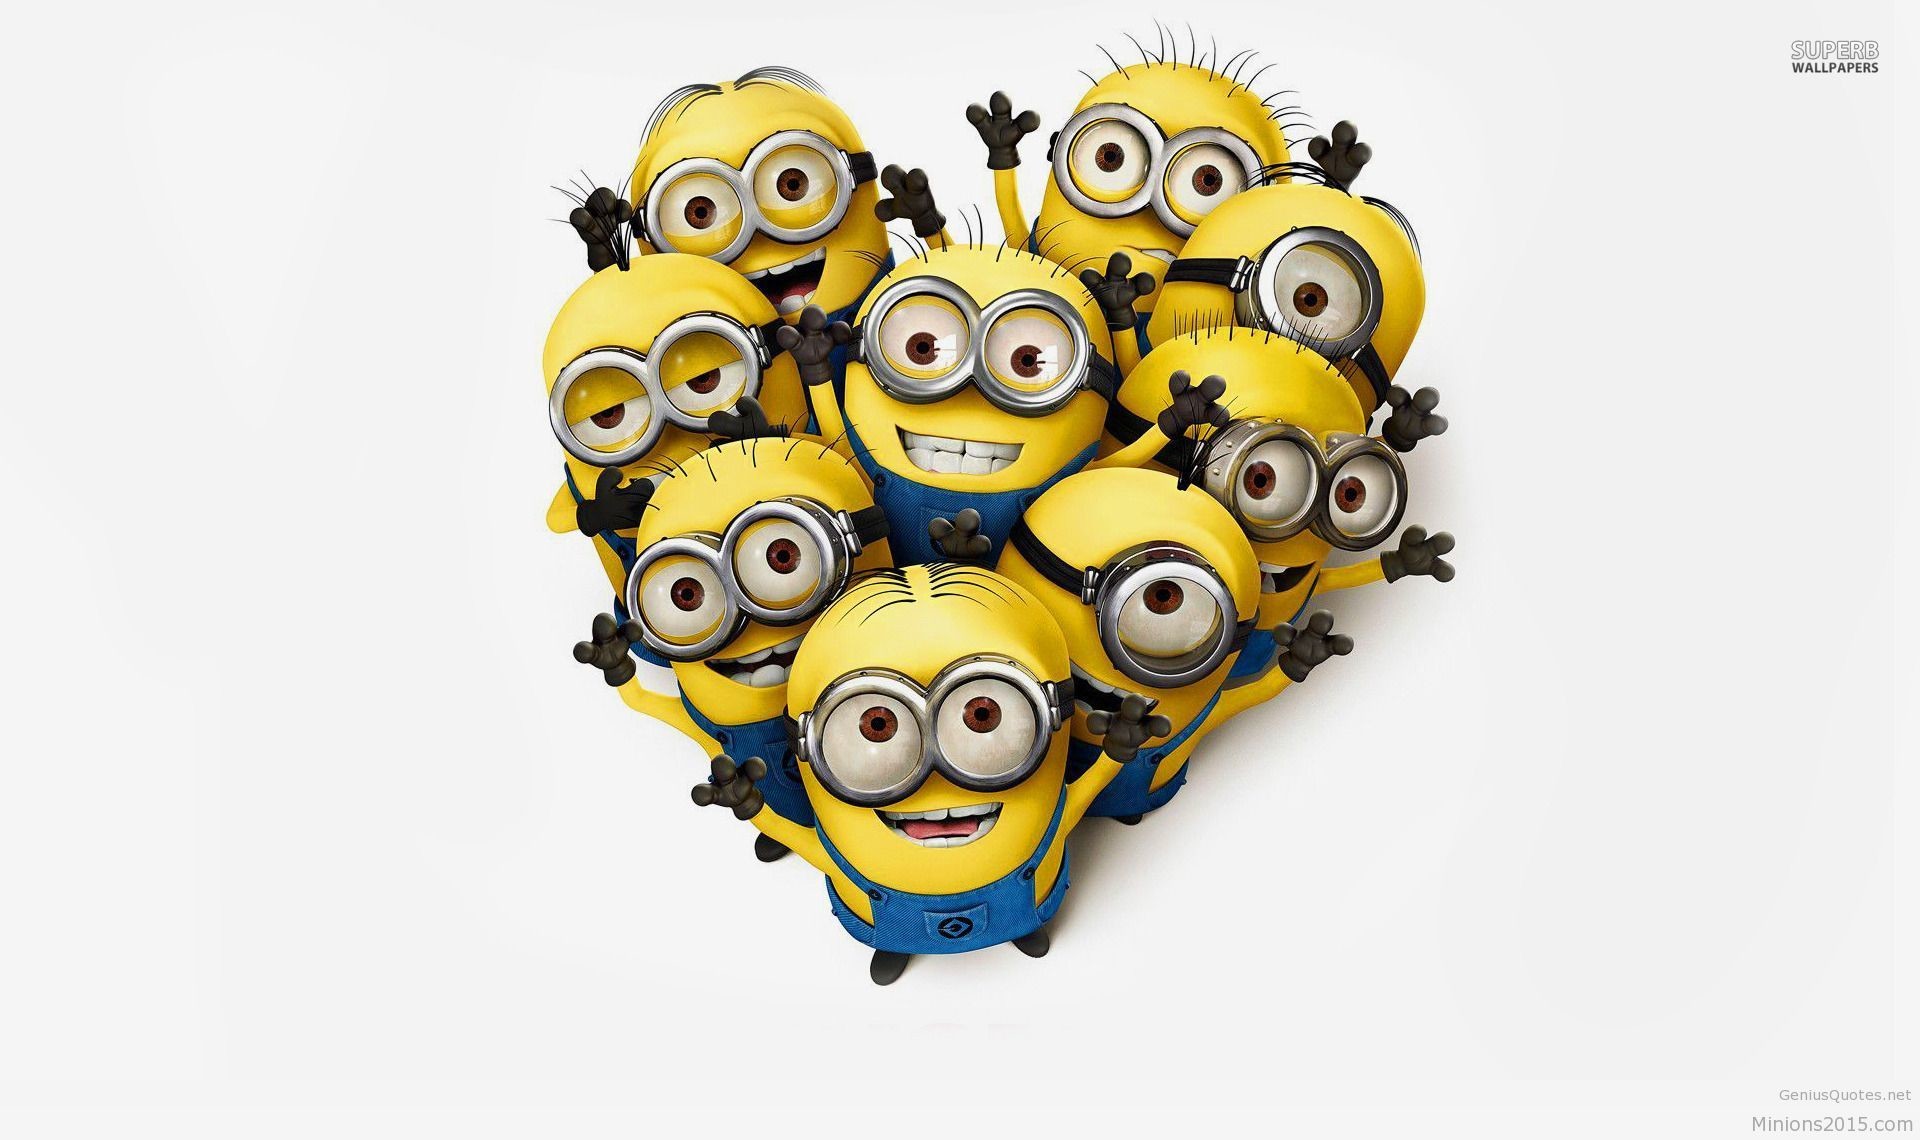 Minions wallpaper x funny pictures tumblr quotes captions .